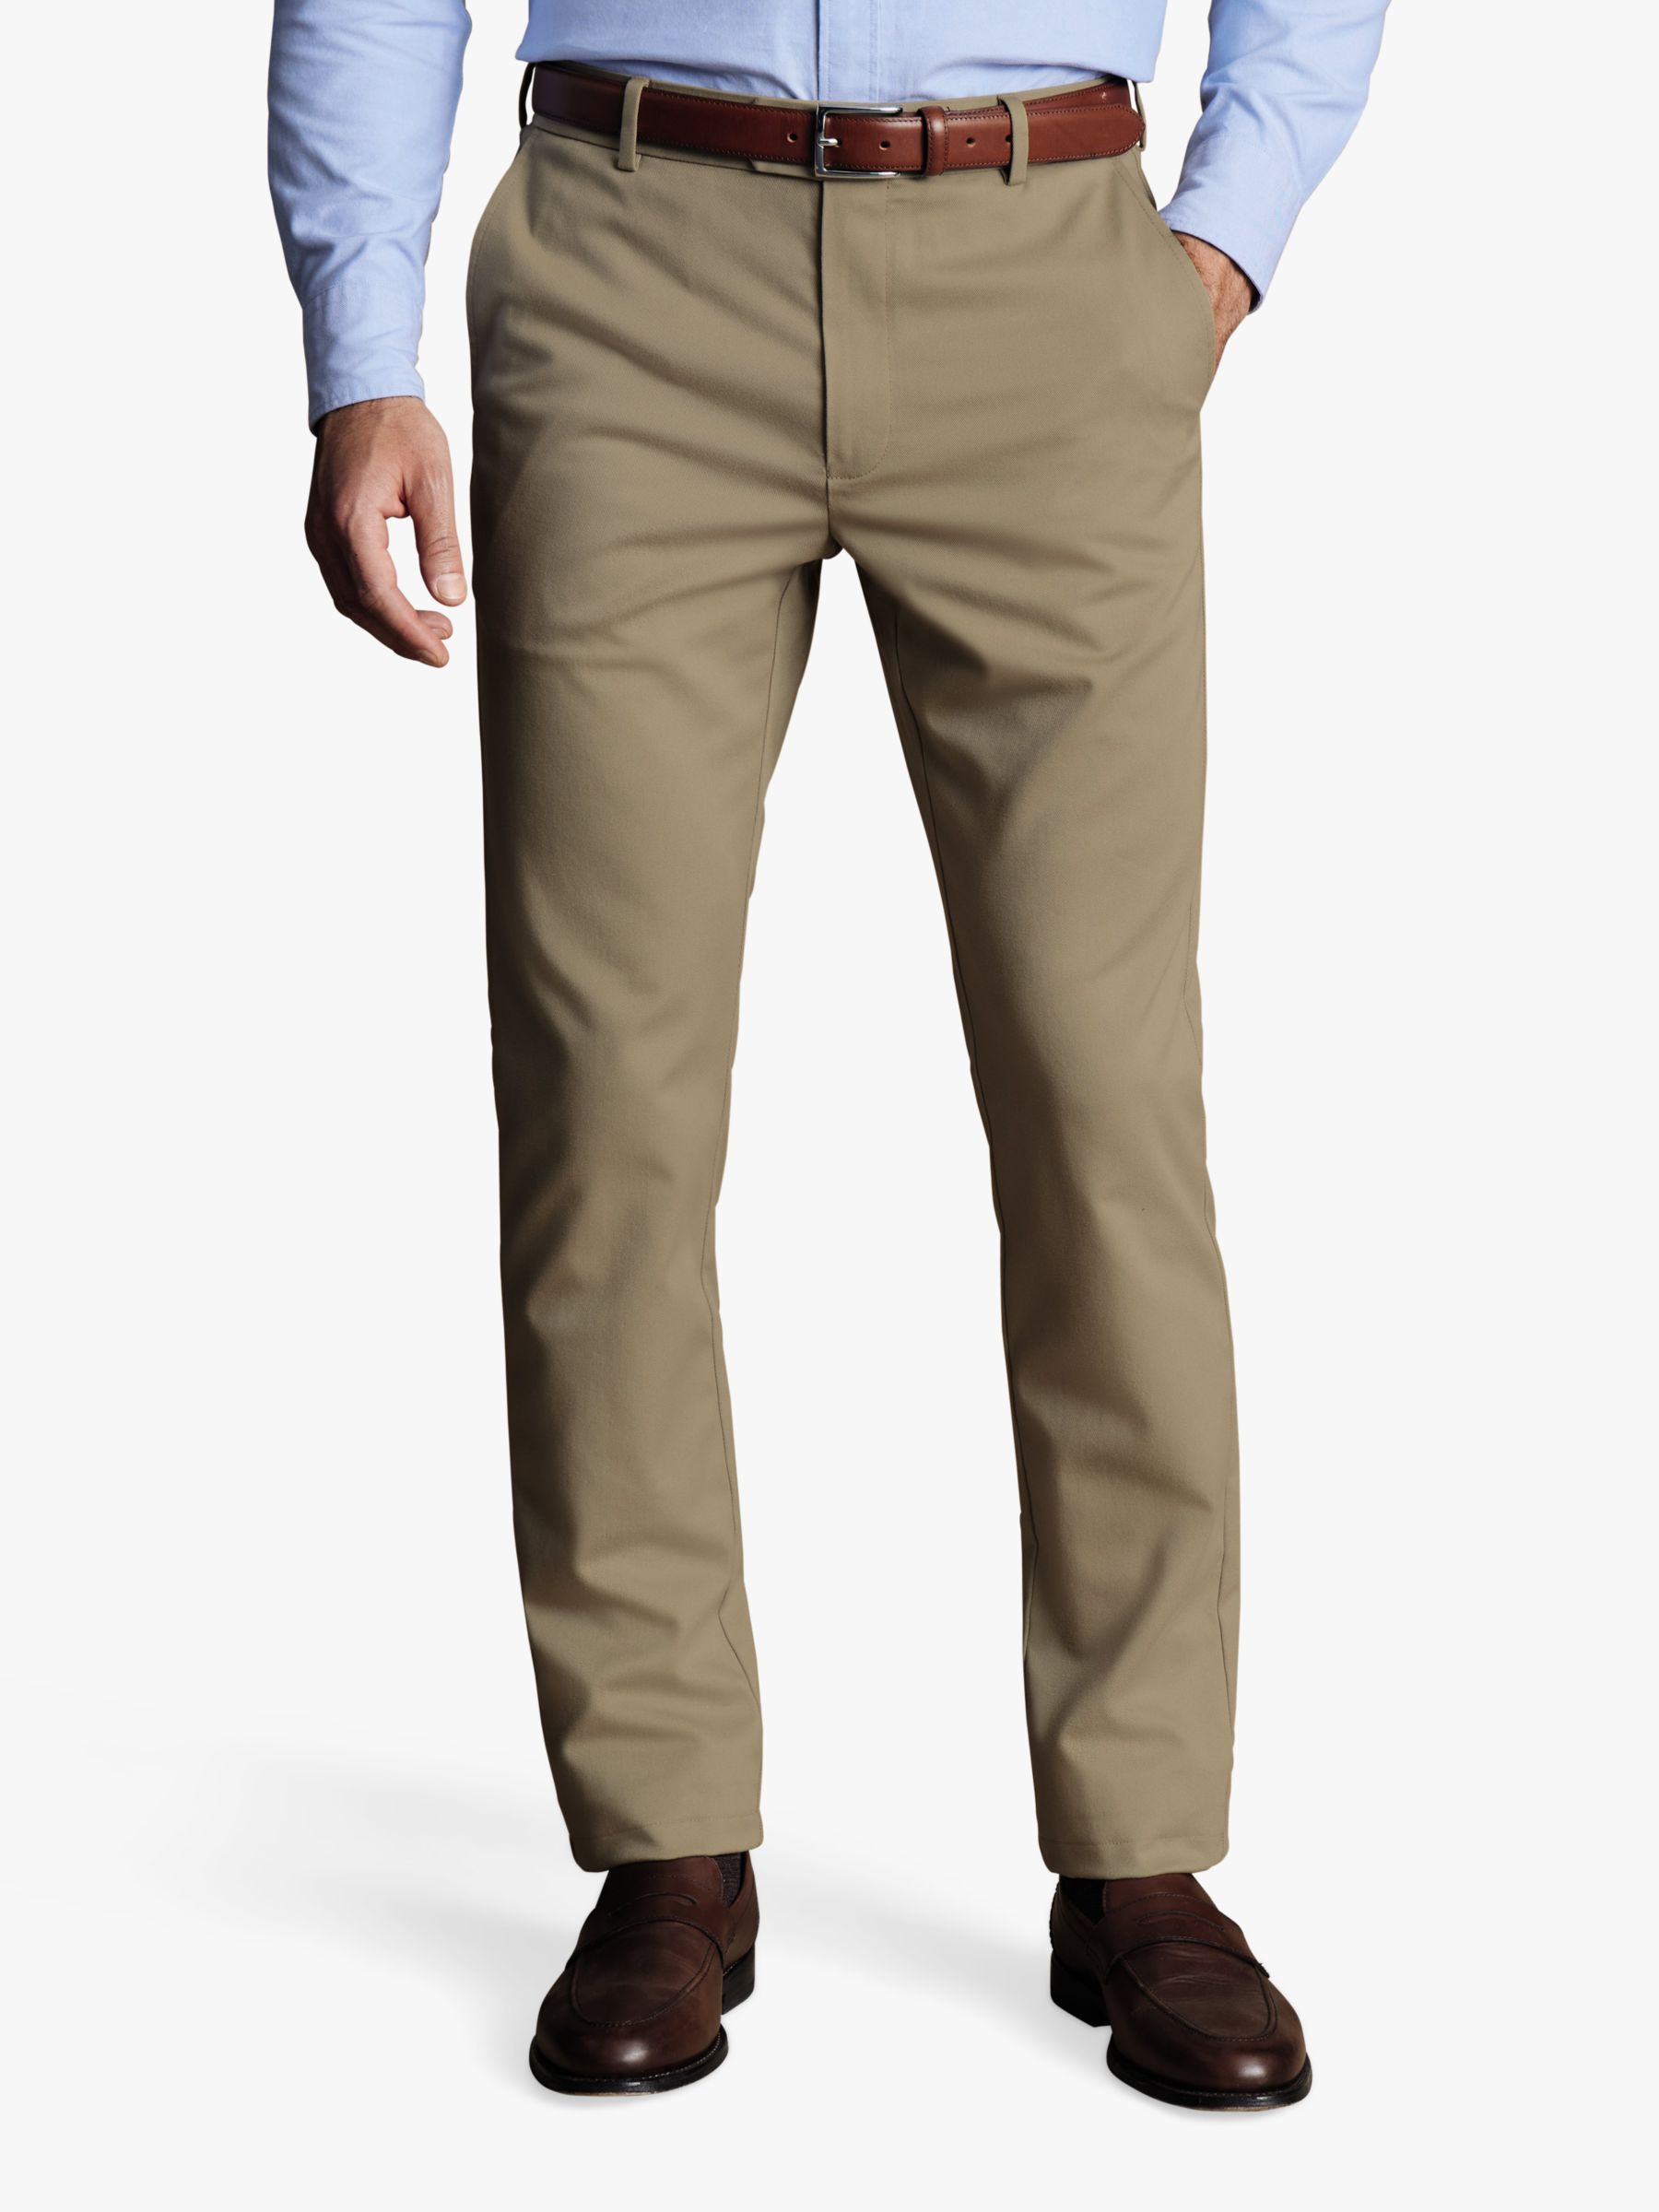 Buy Charles Tyrwhitt Classic Fit Ultimate Non-Iron Chinos Online at johnlewis.com